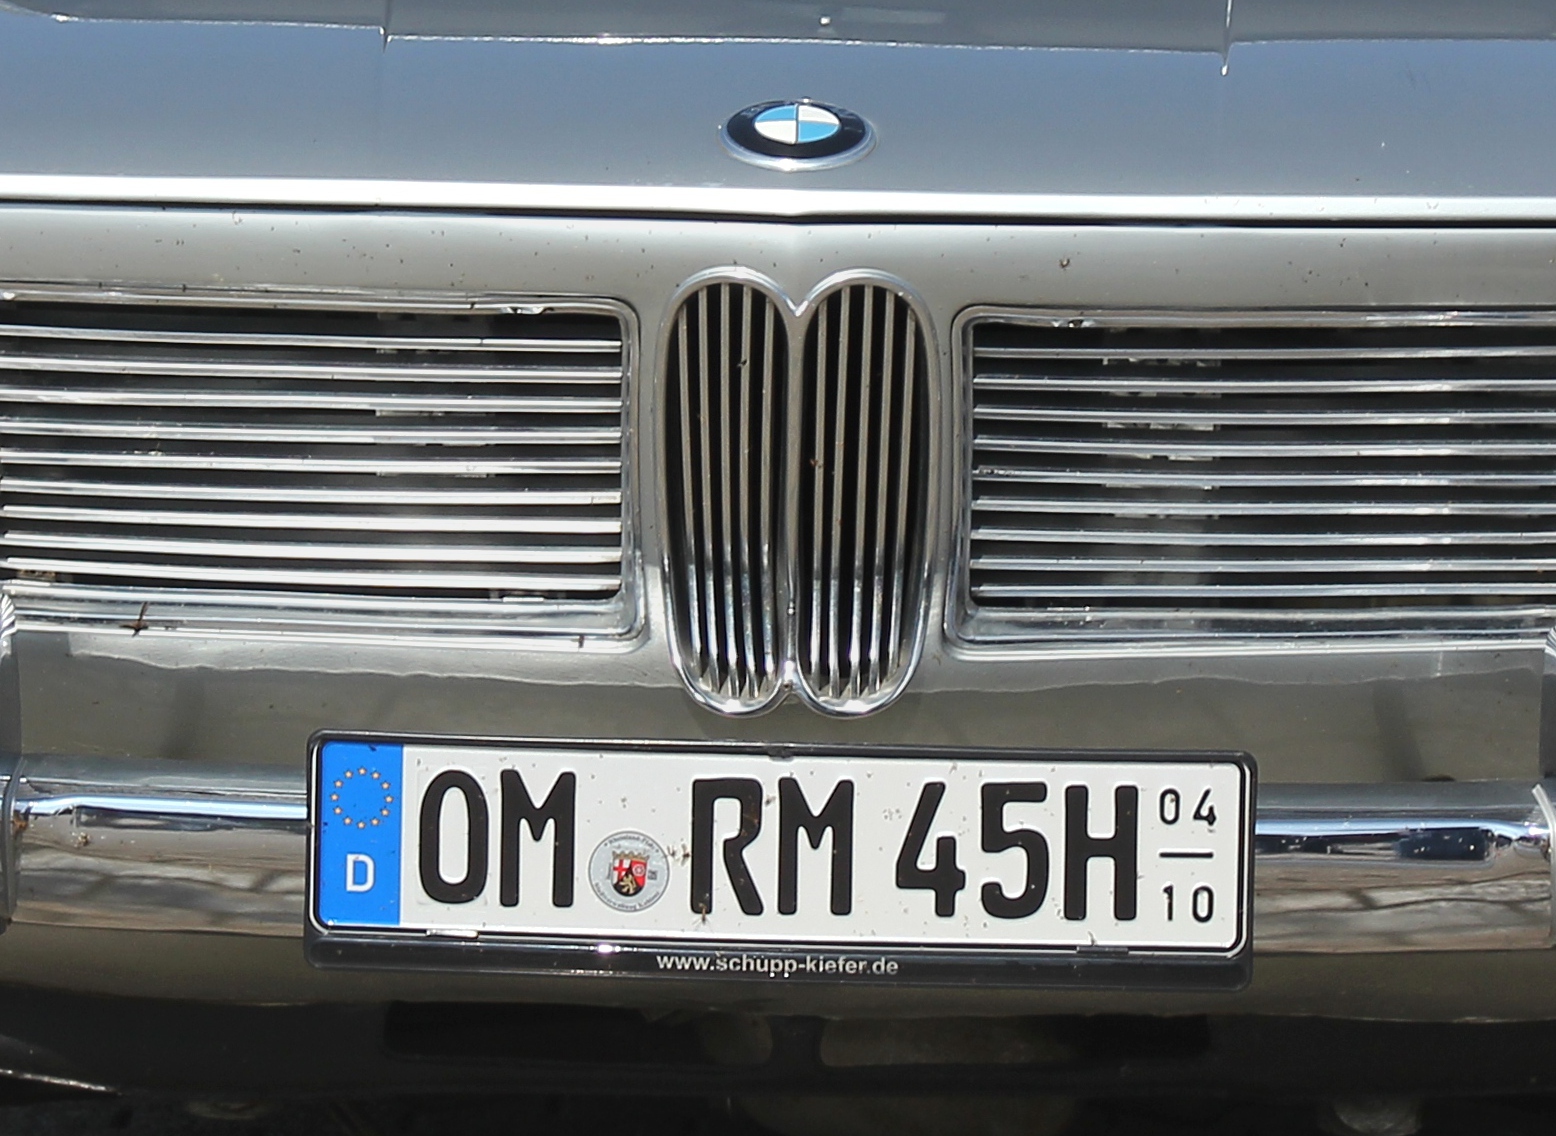 https://upload.wikimedia.org/wikipedia/commons/2/26/BMW_1800%2C_Front_-_Grill_%282018-06-03_Sp%29.JPG